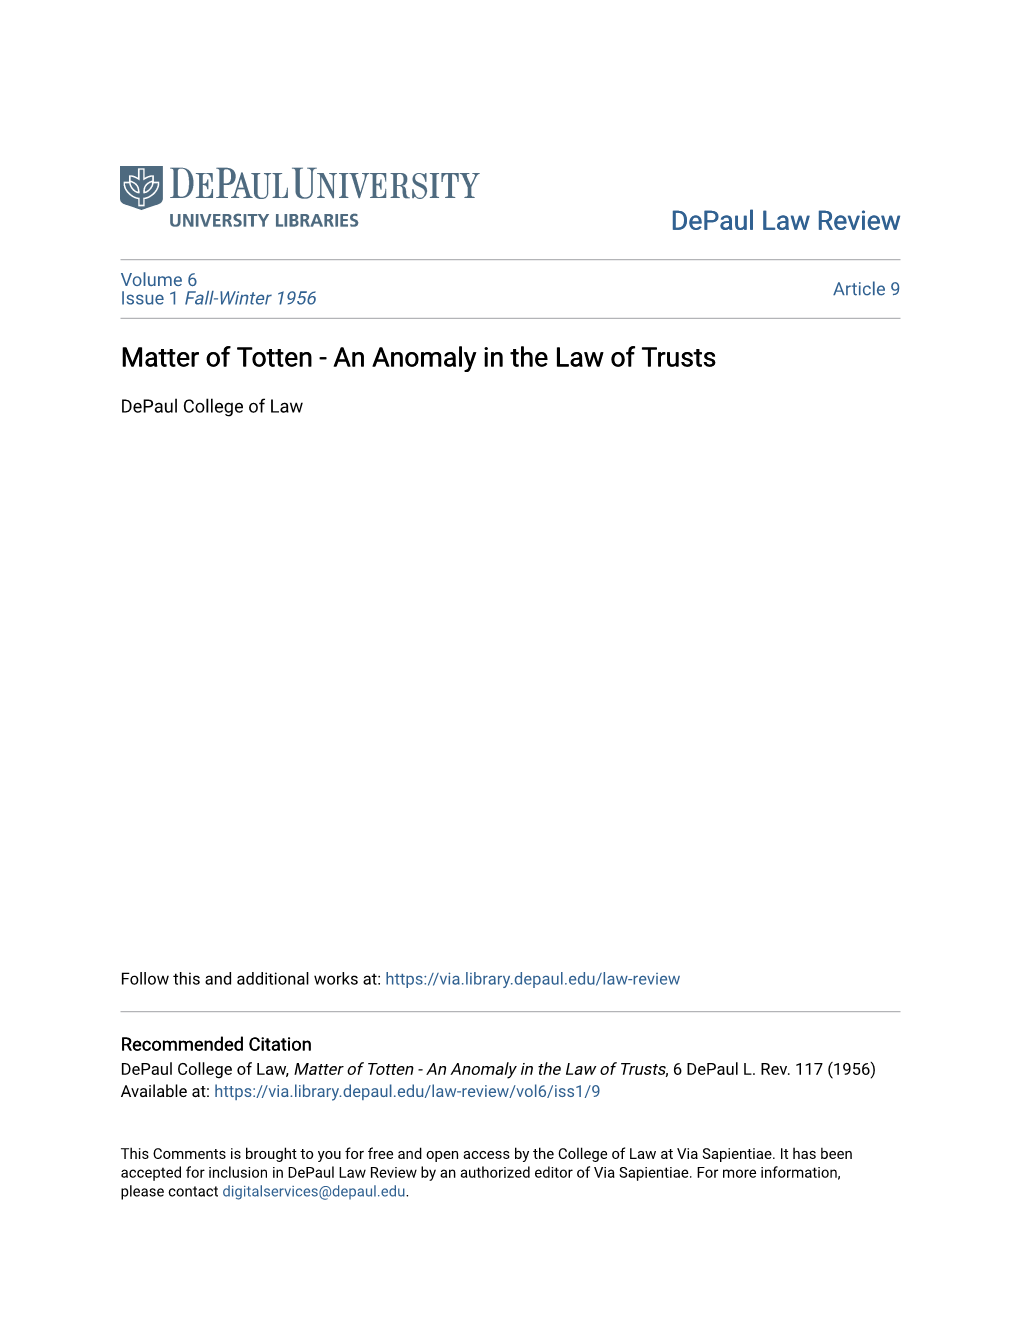 Matter of Totten - an Anomaly in the Law of Trusts